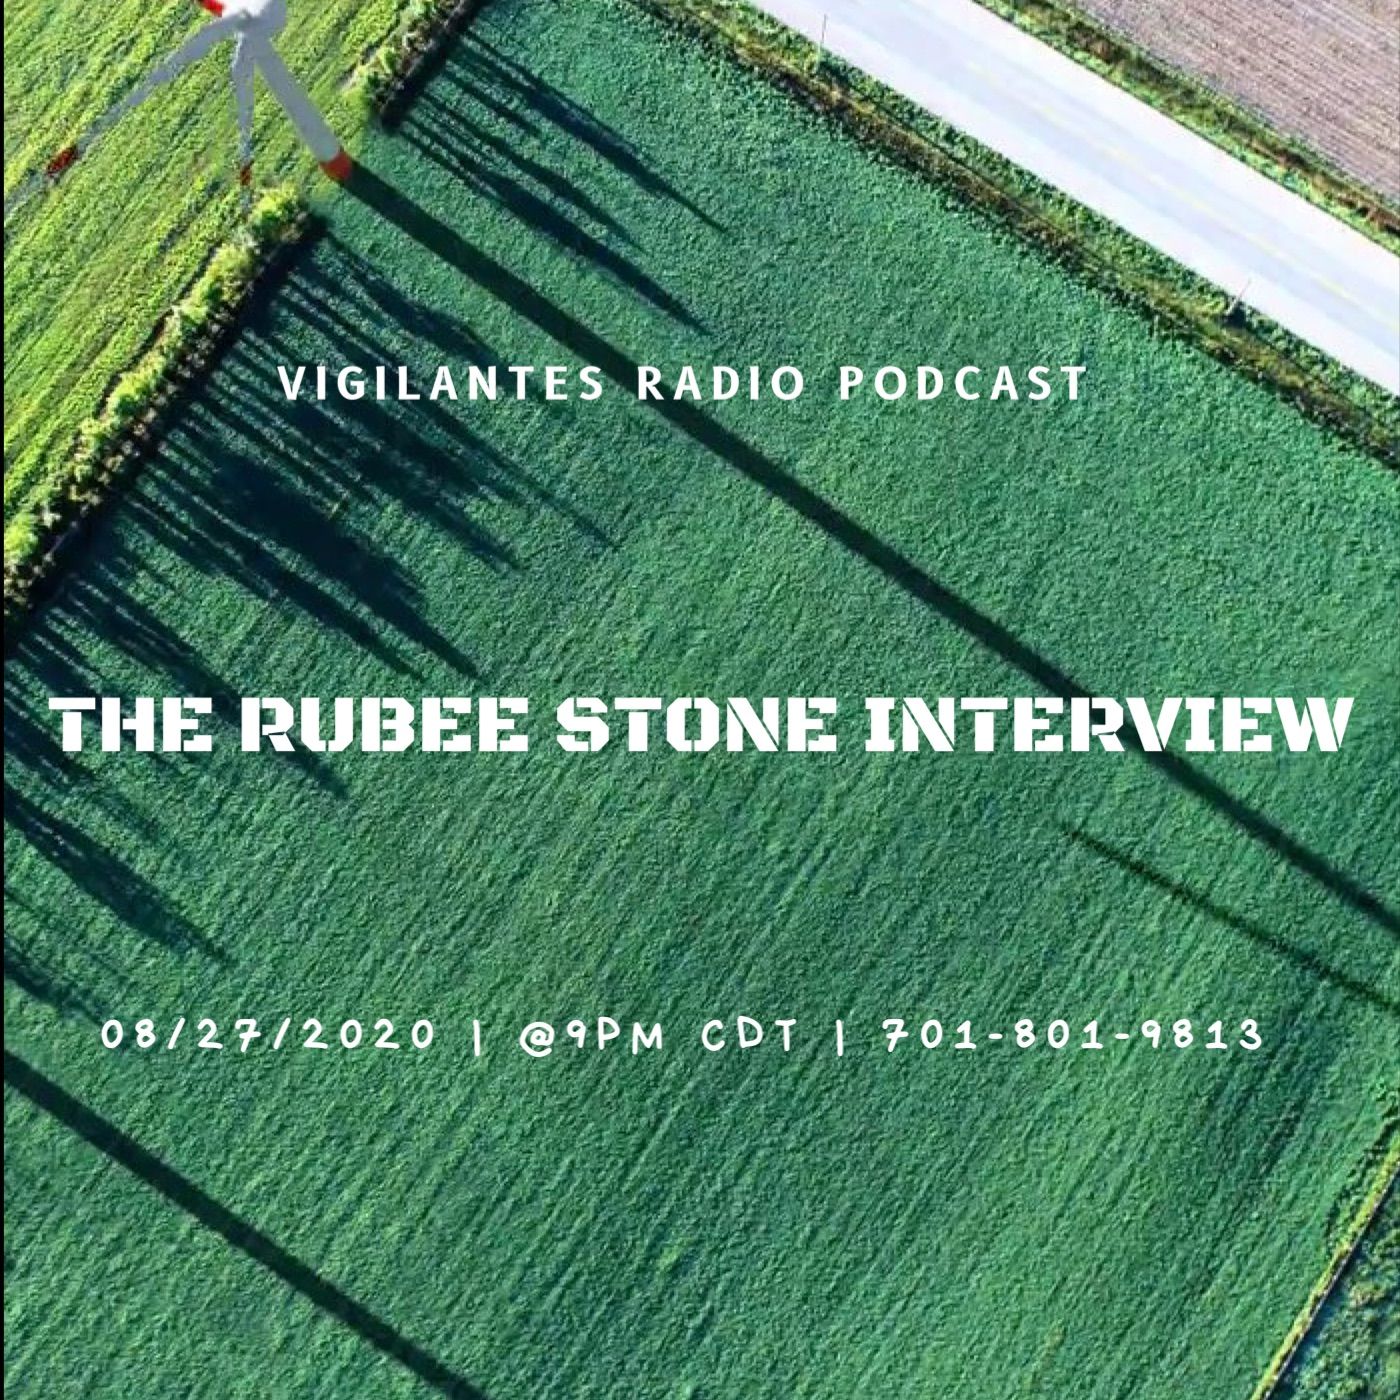 The Rubee Stone Interview. Image